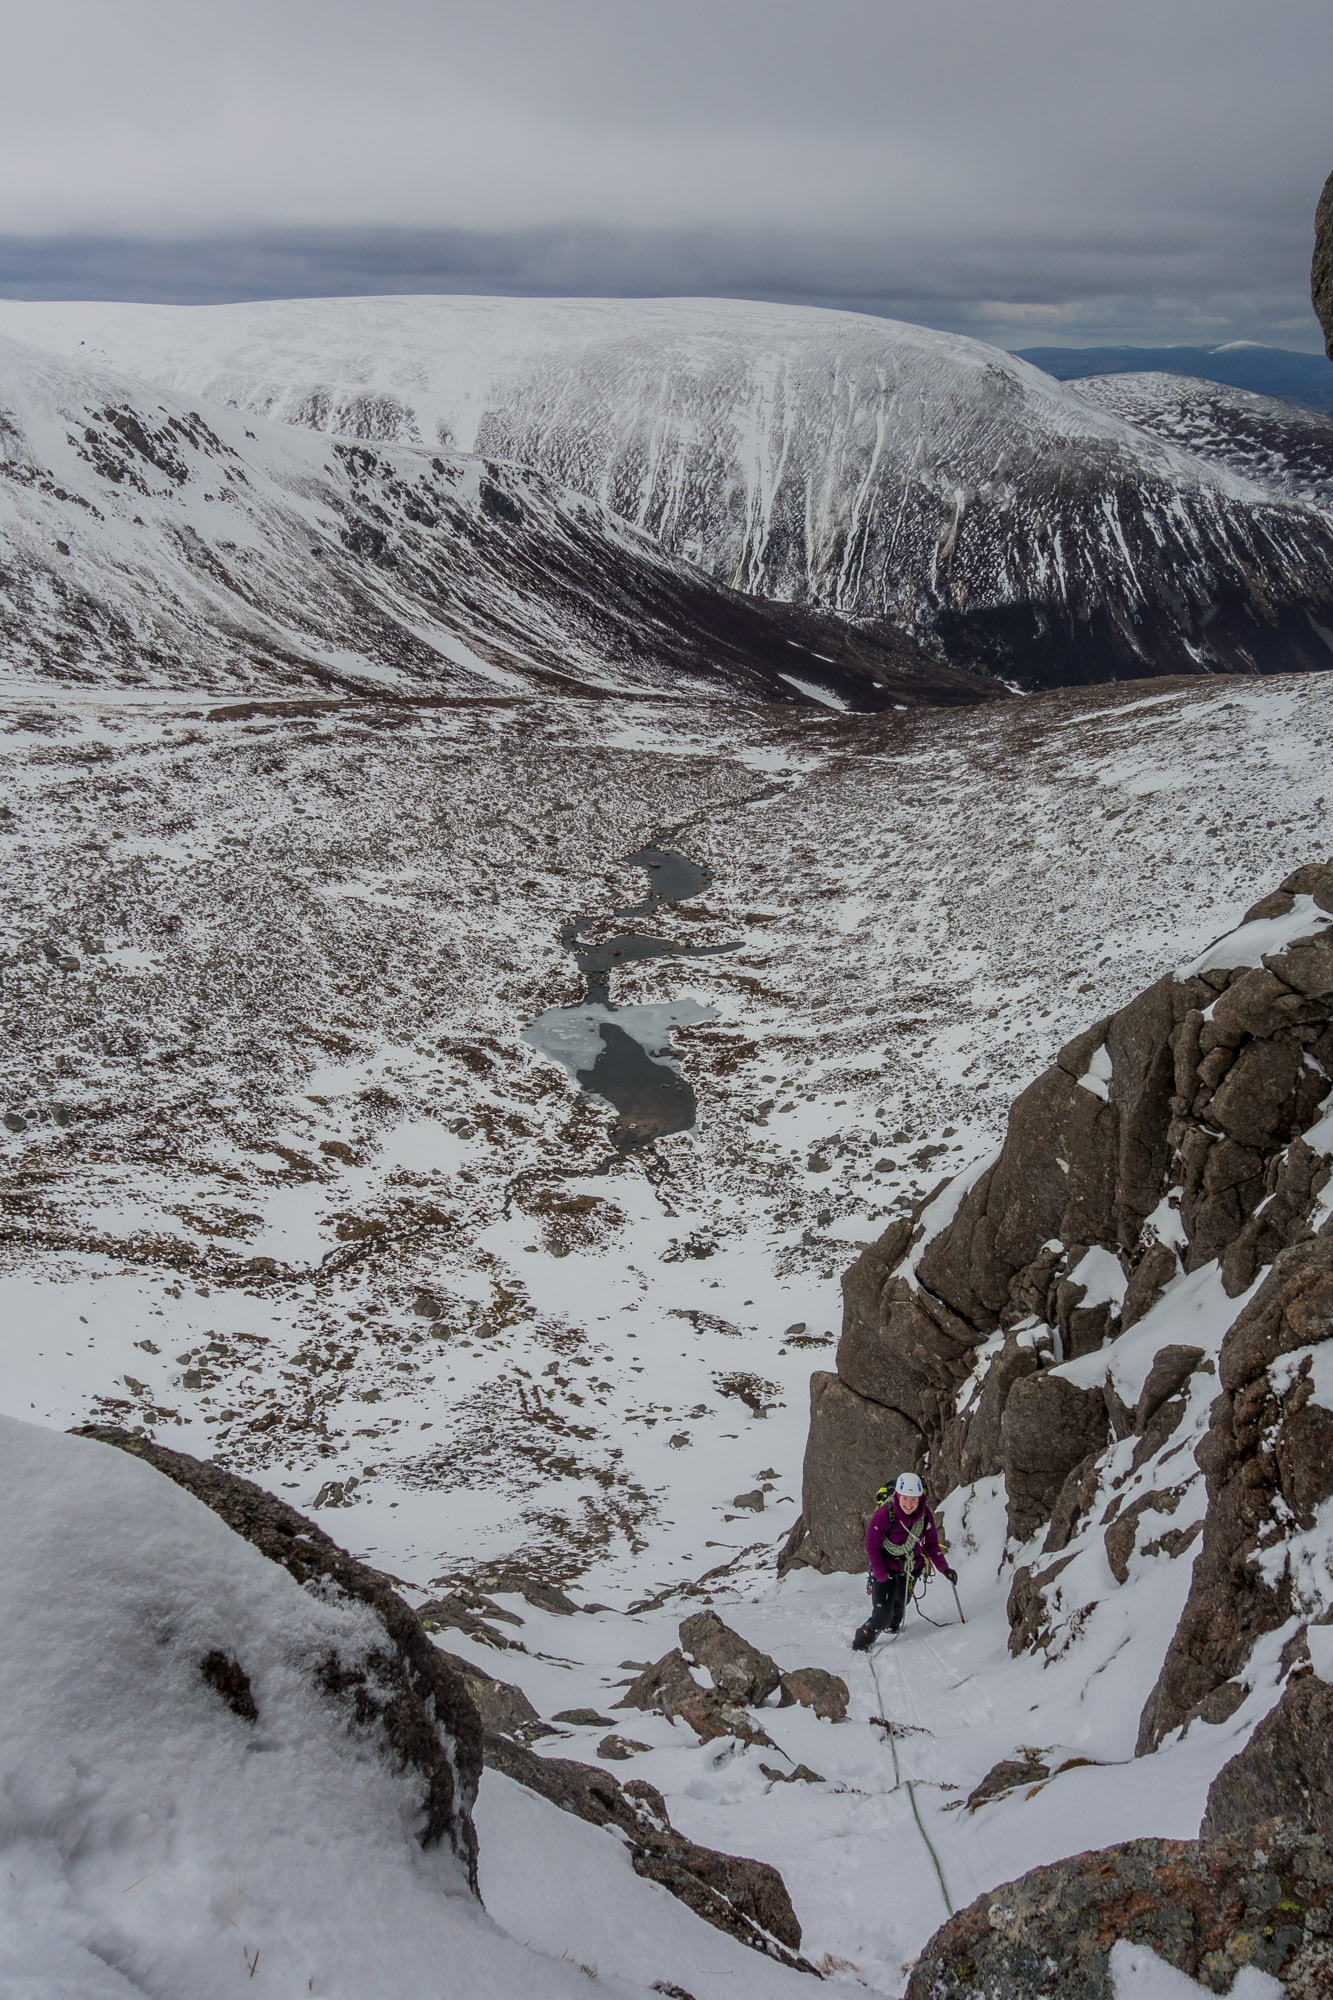 Typical terrain on the winter line with the glen unfolding below